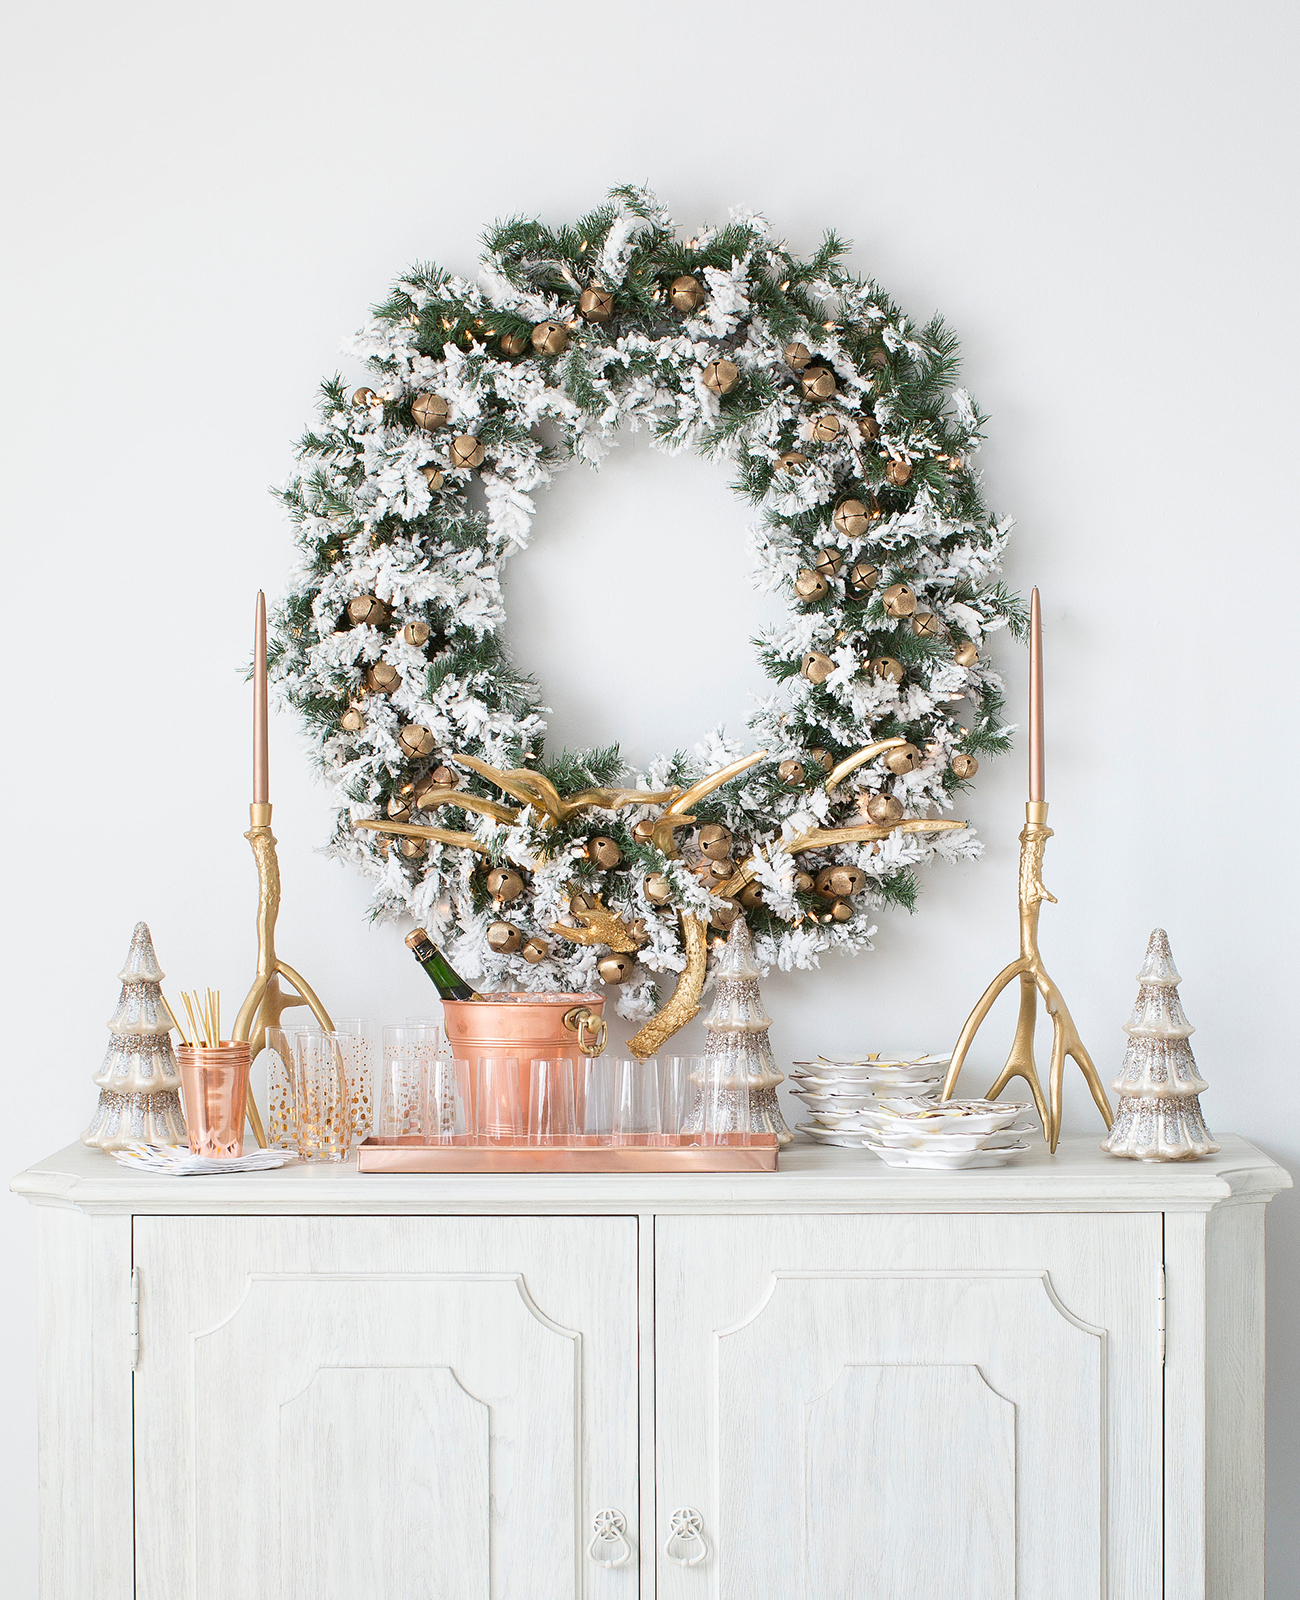 Holiday vignette of wreath over a credenza with cocktail party setup